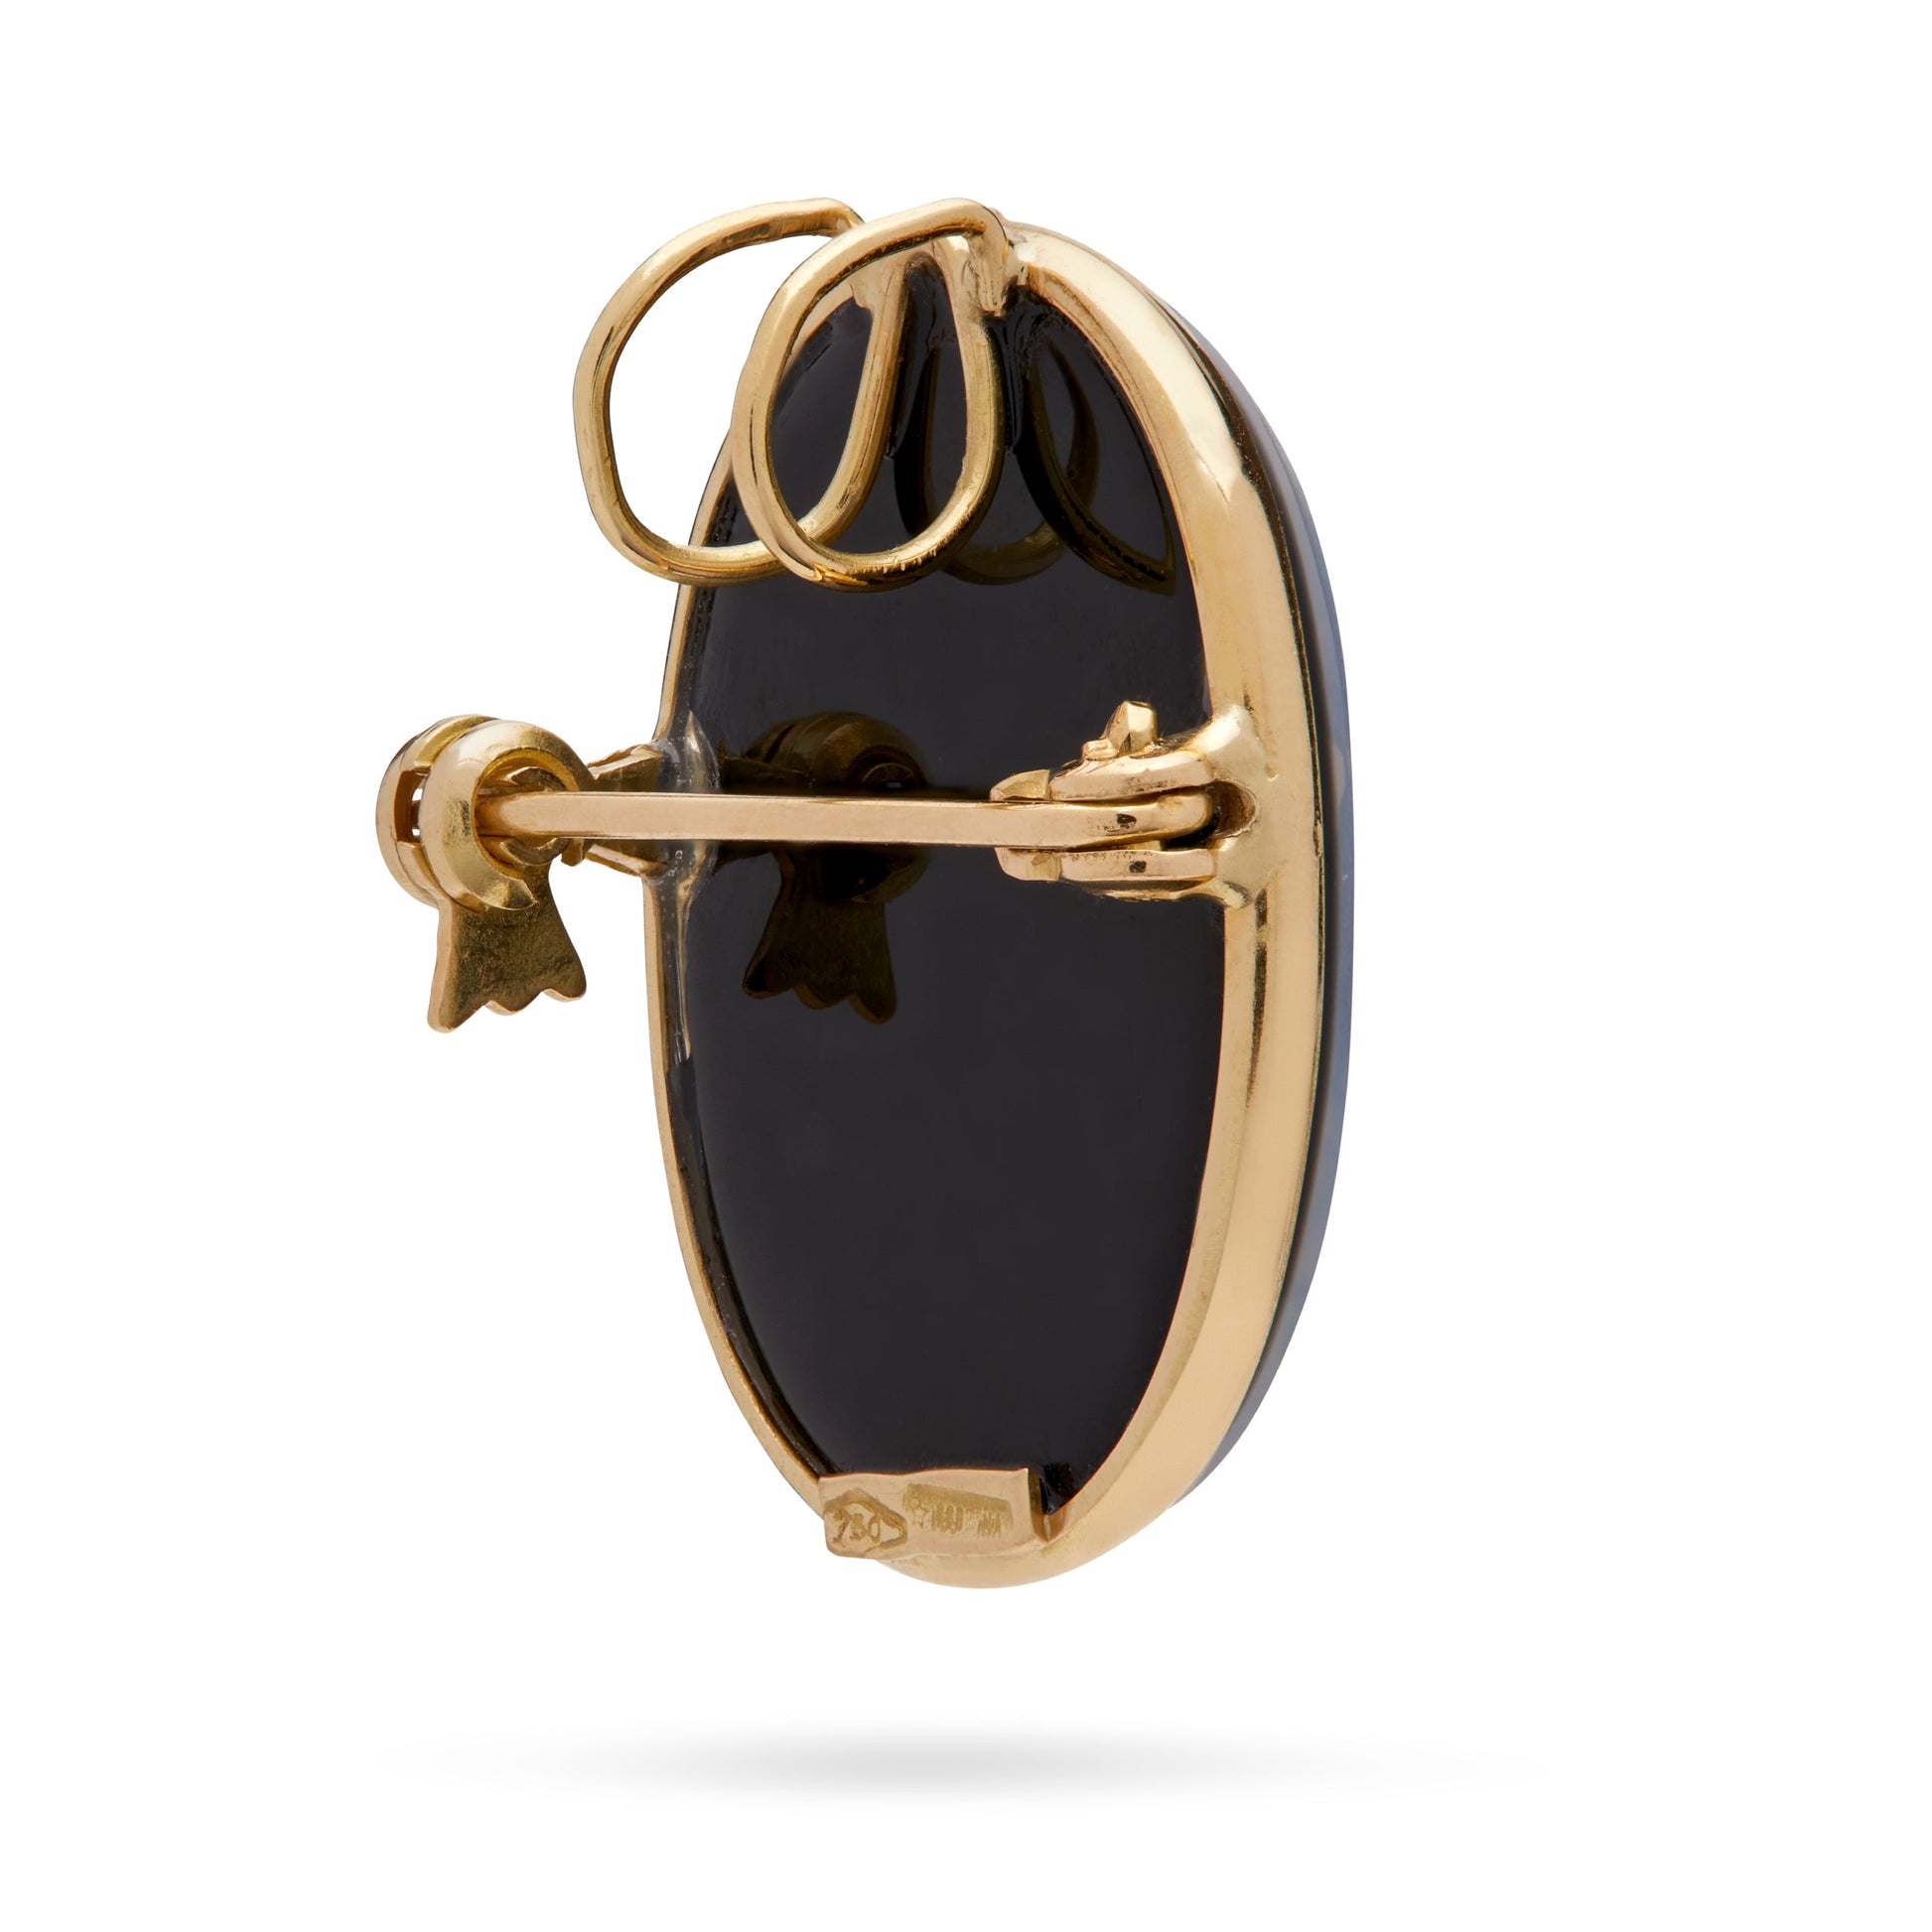 Mondo Cattolico Pendant 20x15 mm (0.79x0.59 in) Oval Yellow Gold Brooch and Pendant With Black Agate Cameo Portraying a Woman